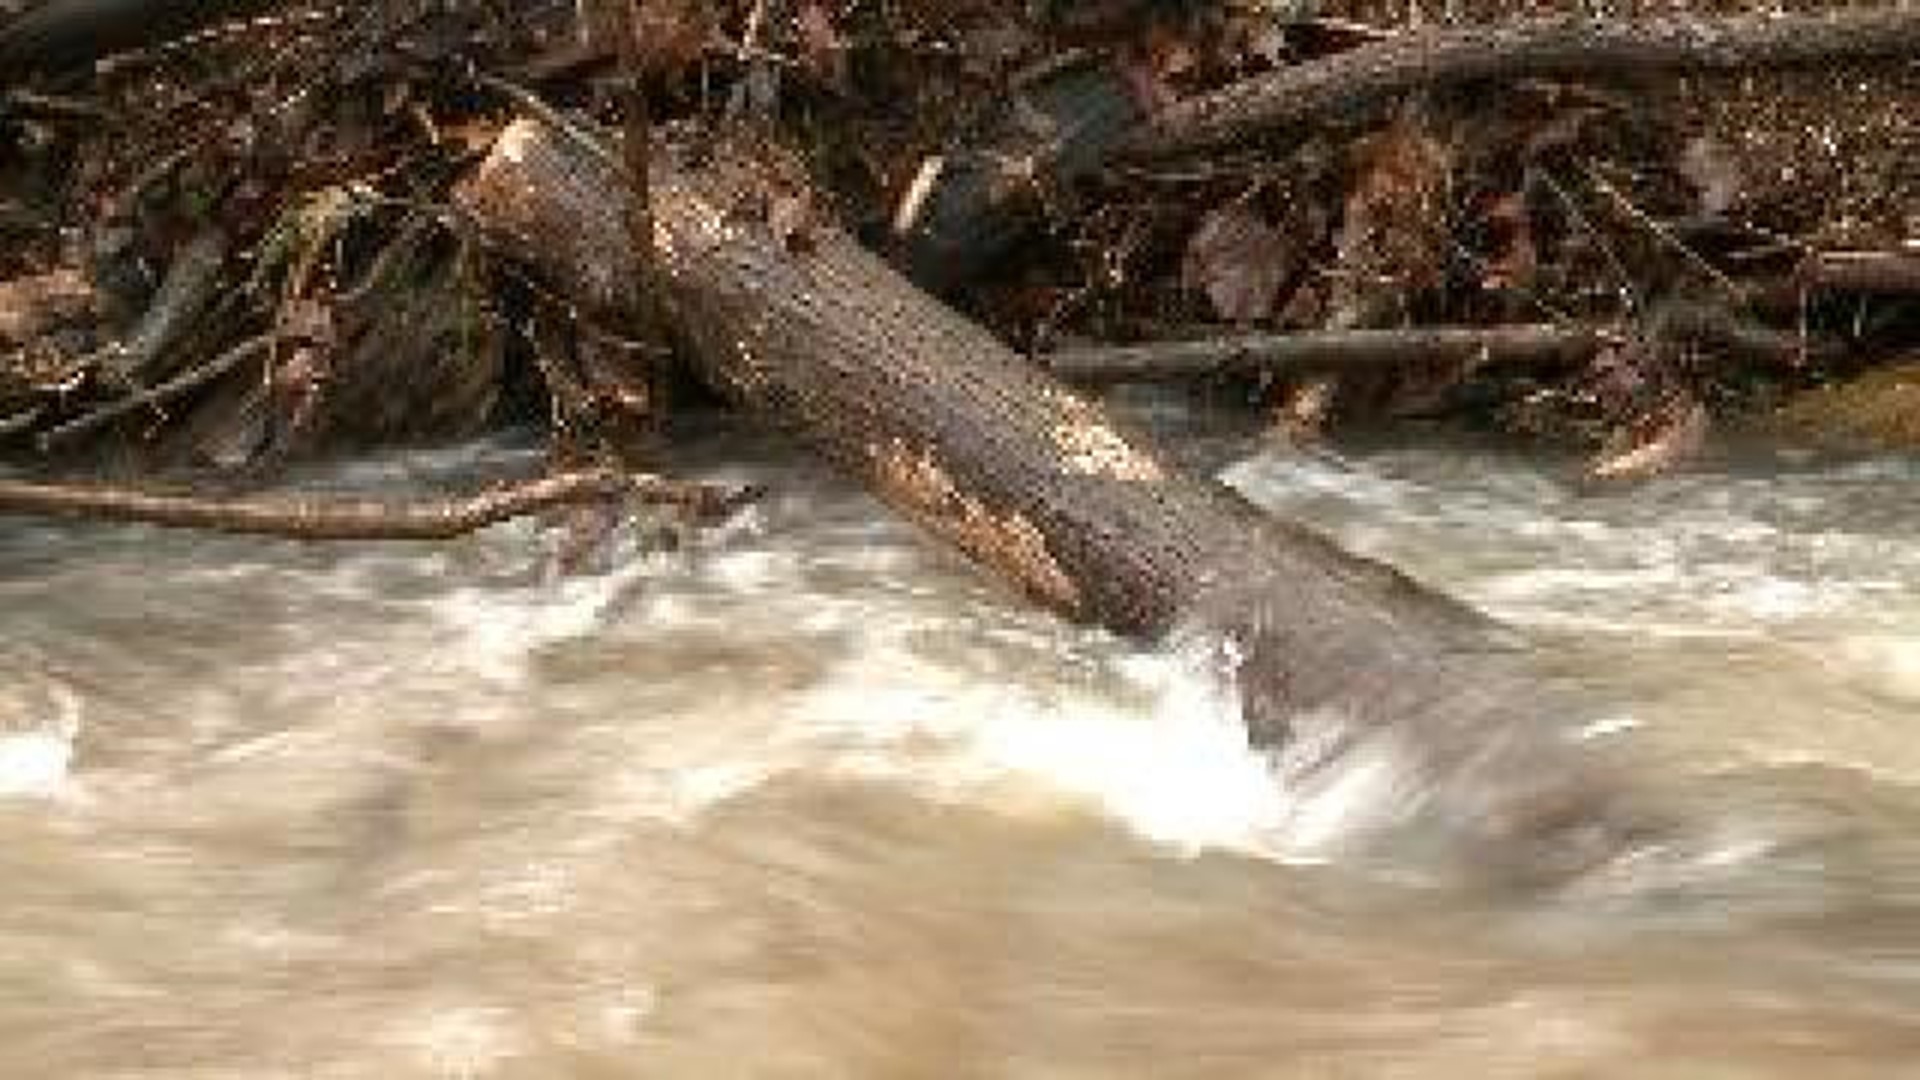 Flood Damage Adds Up in Benton County